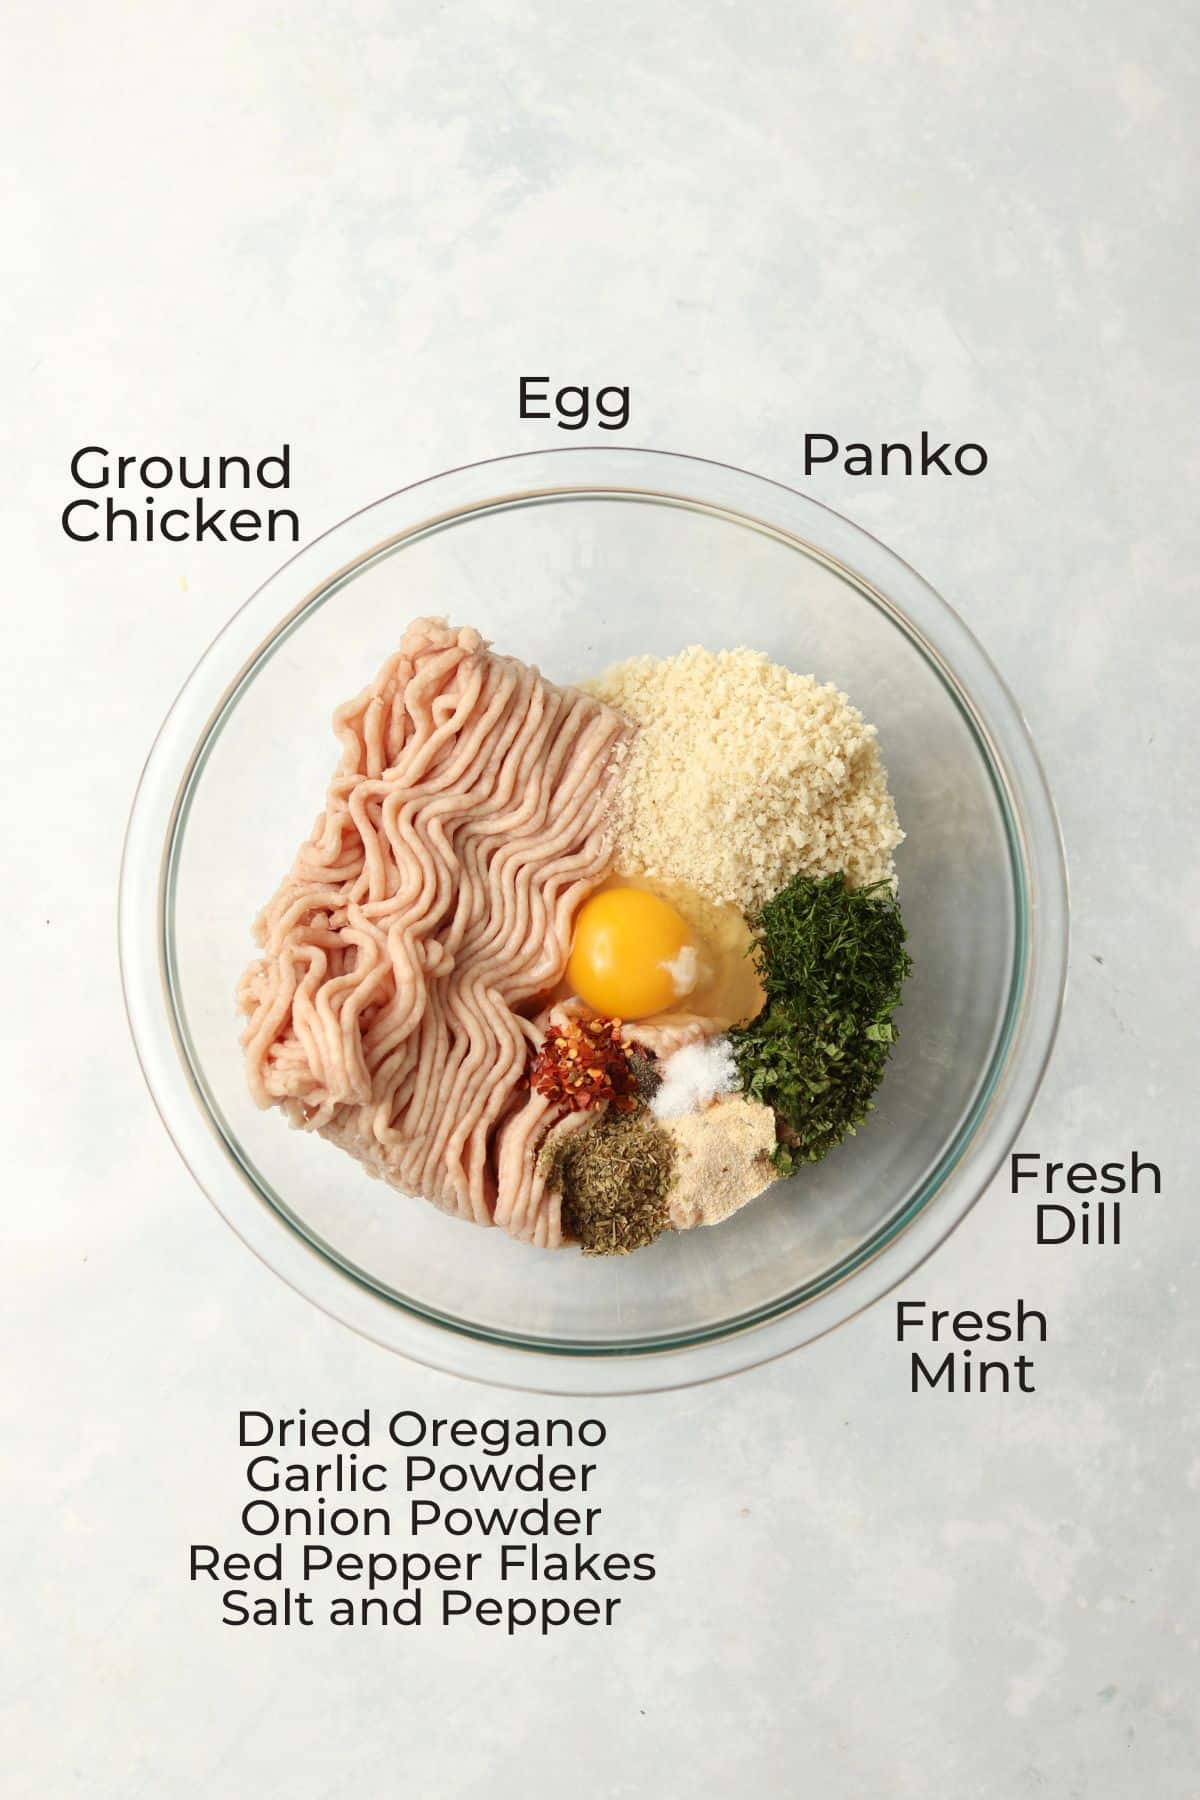 ground chicken, egg, Panko, spices, and herbs in a mixing bowl